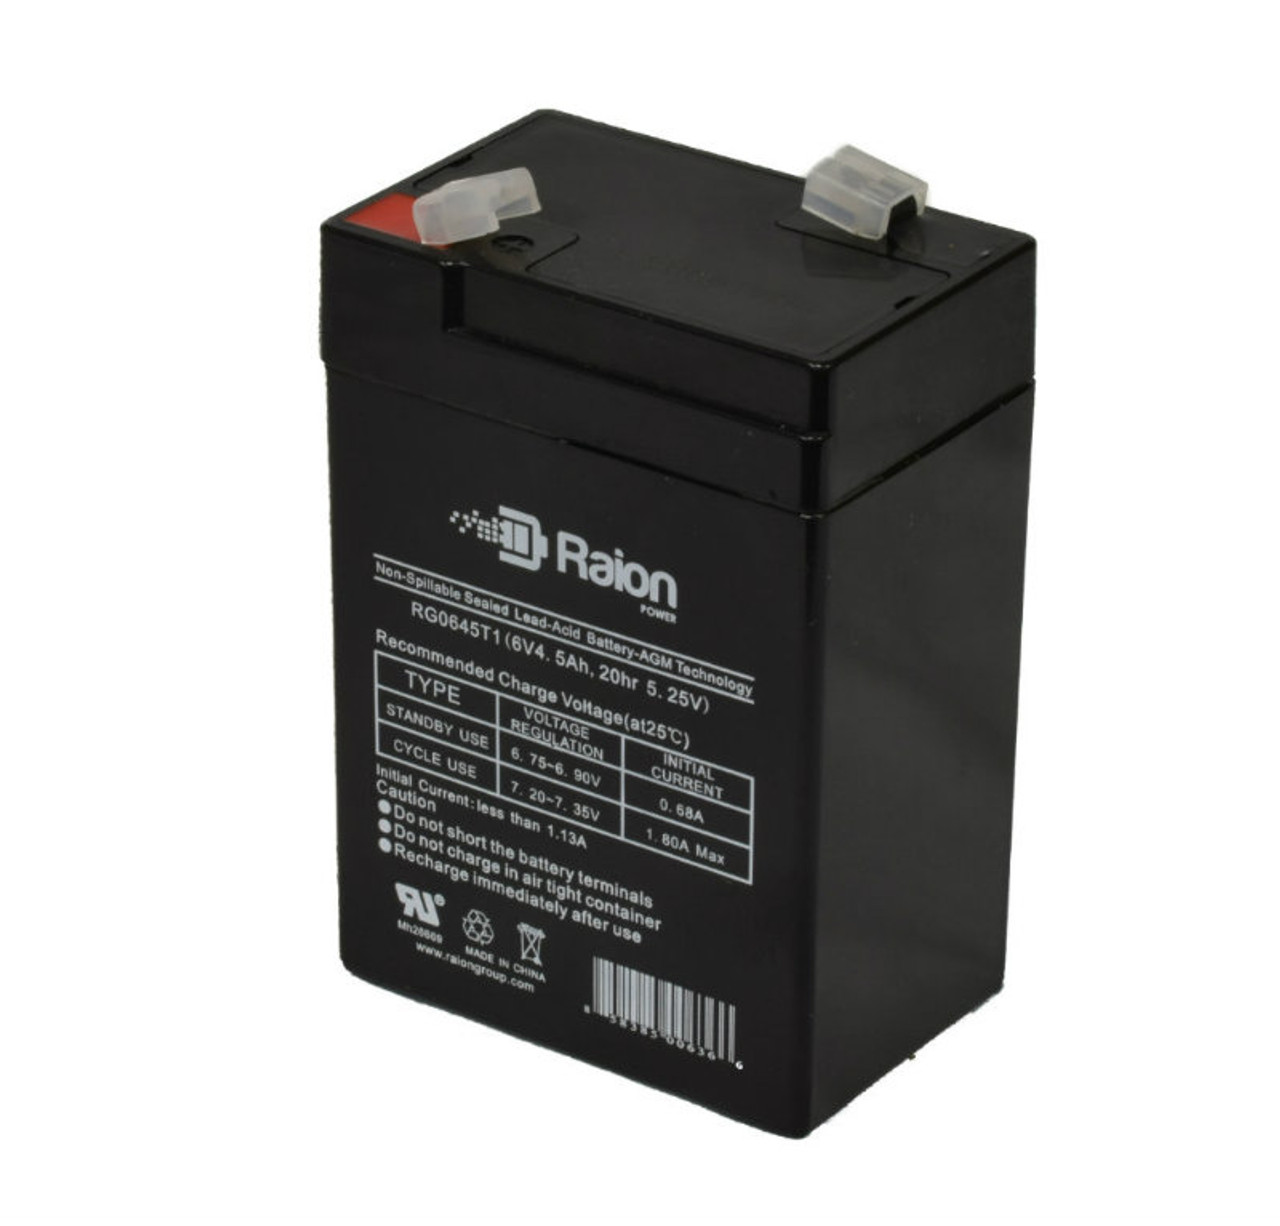 Raion Power RG0645T1 6V 4.5Ah Replacement Battery Cartridge for Edwards 1620